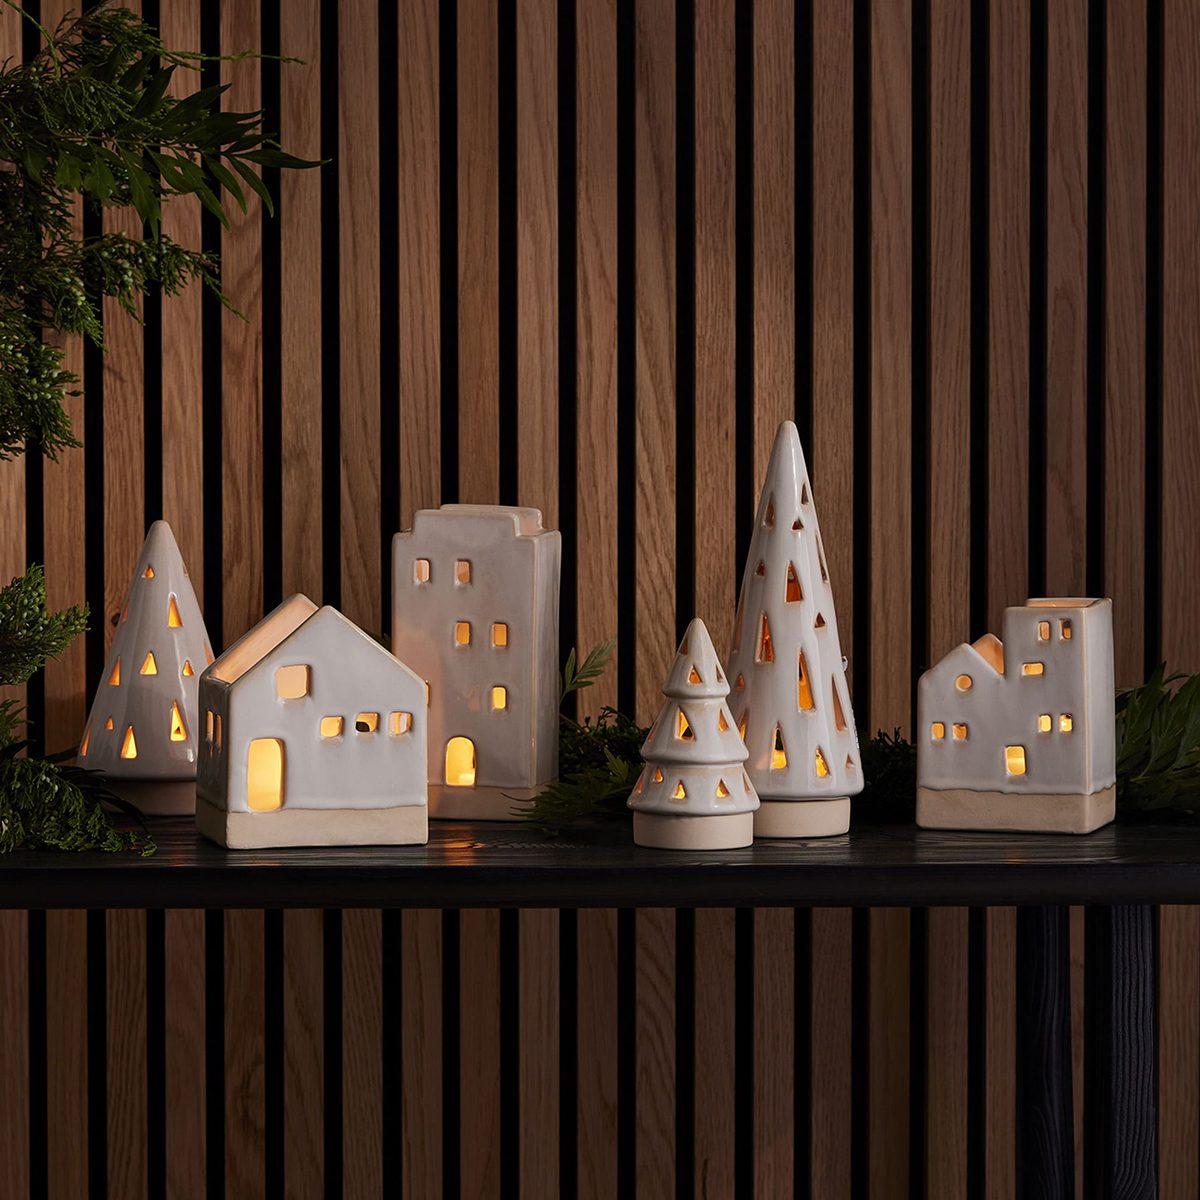 15 Best Christmas Village Sets for a Festive Holiday Display